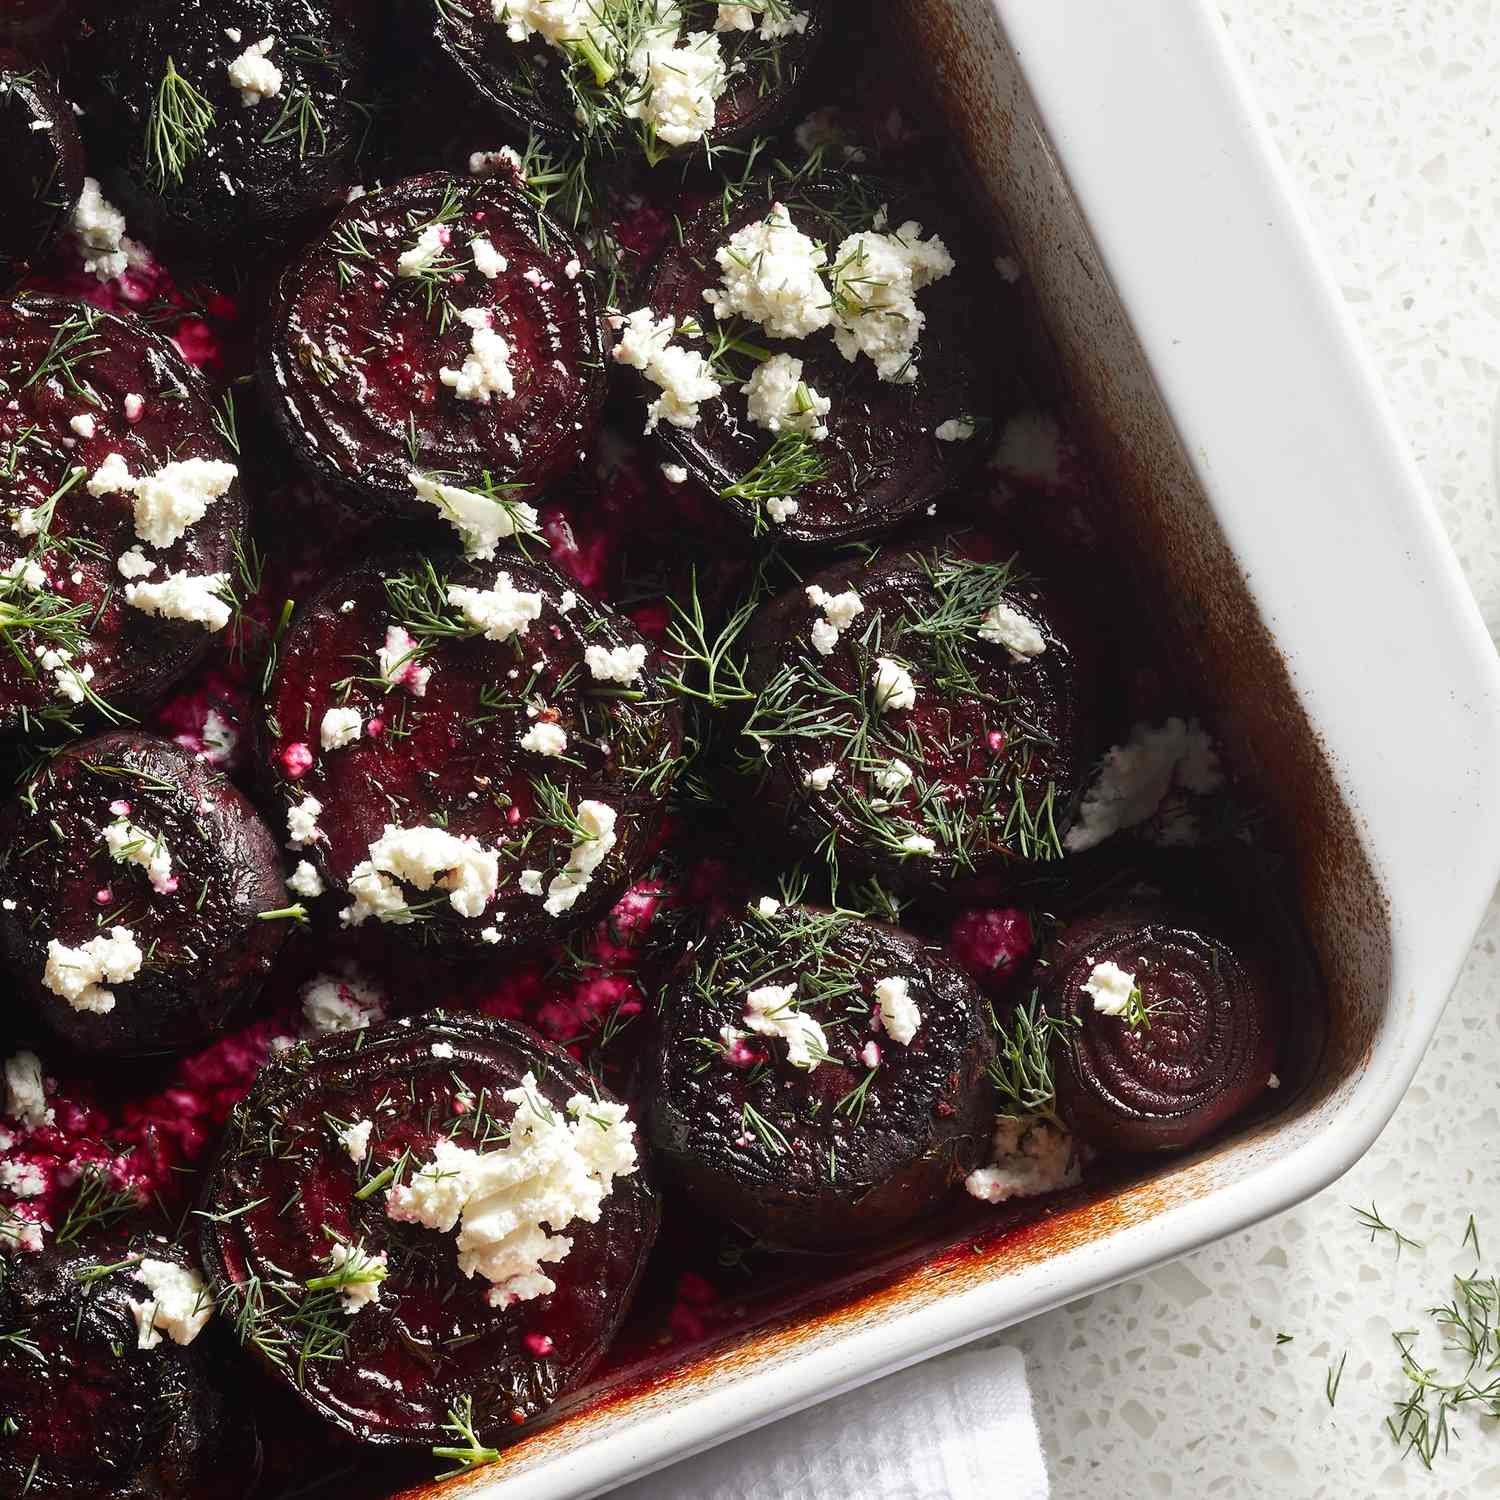 Melting Beets with Goat Cheese